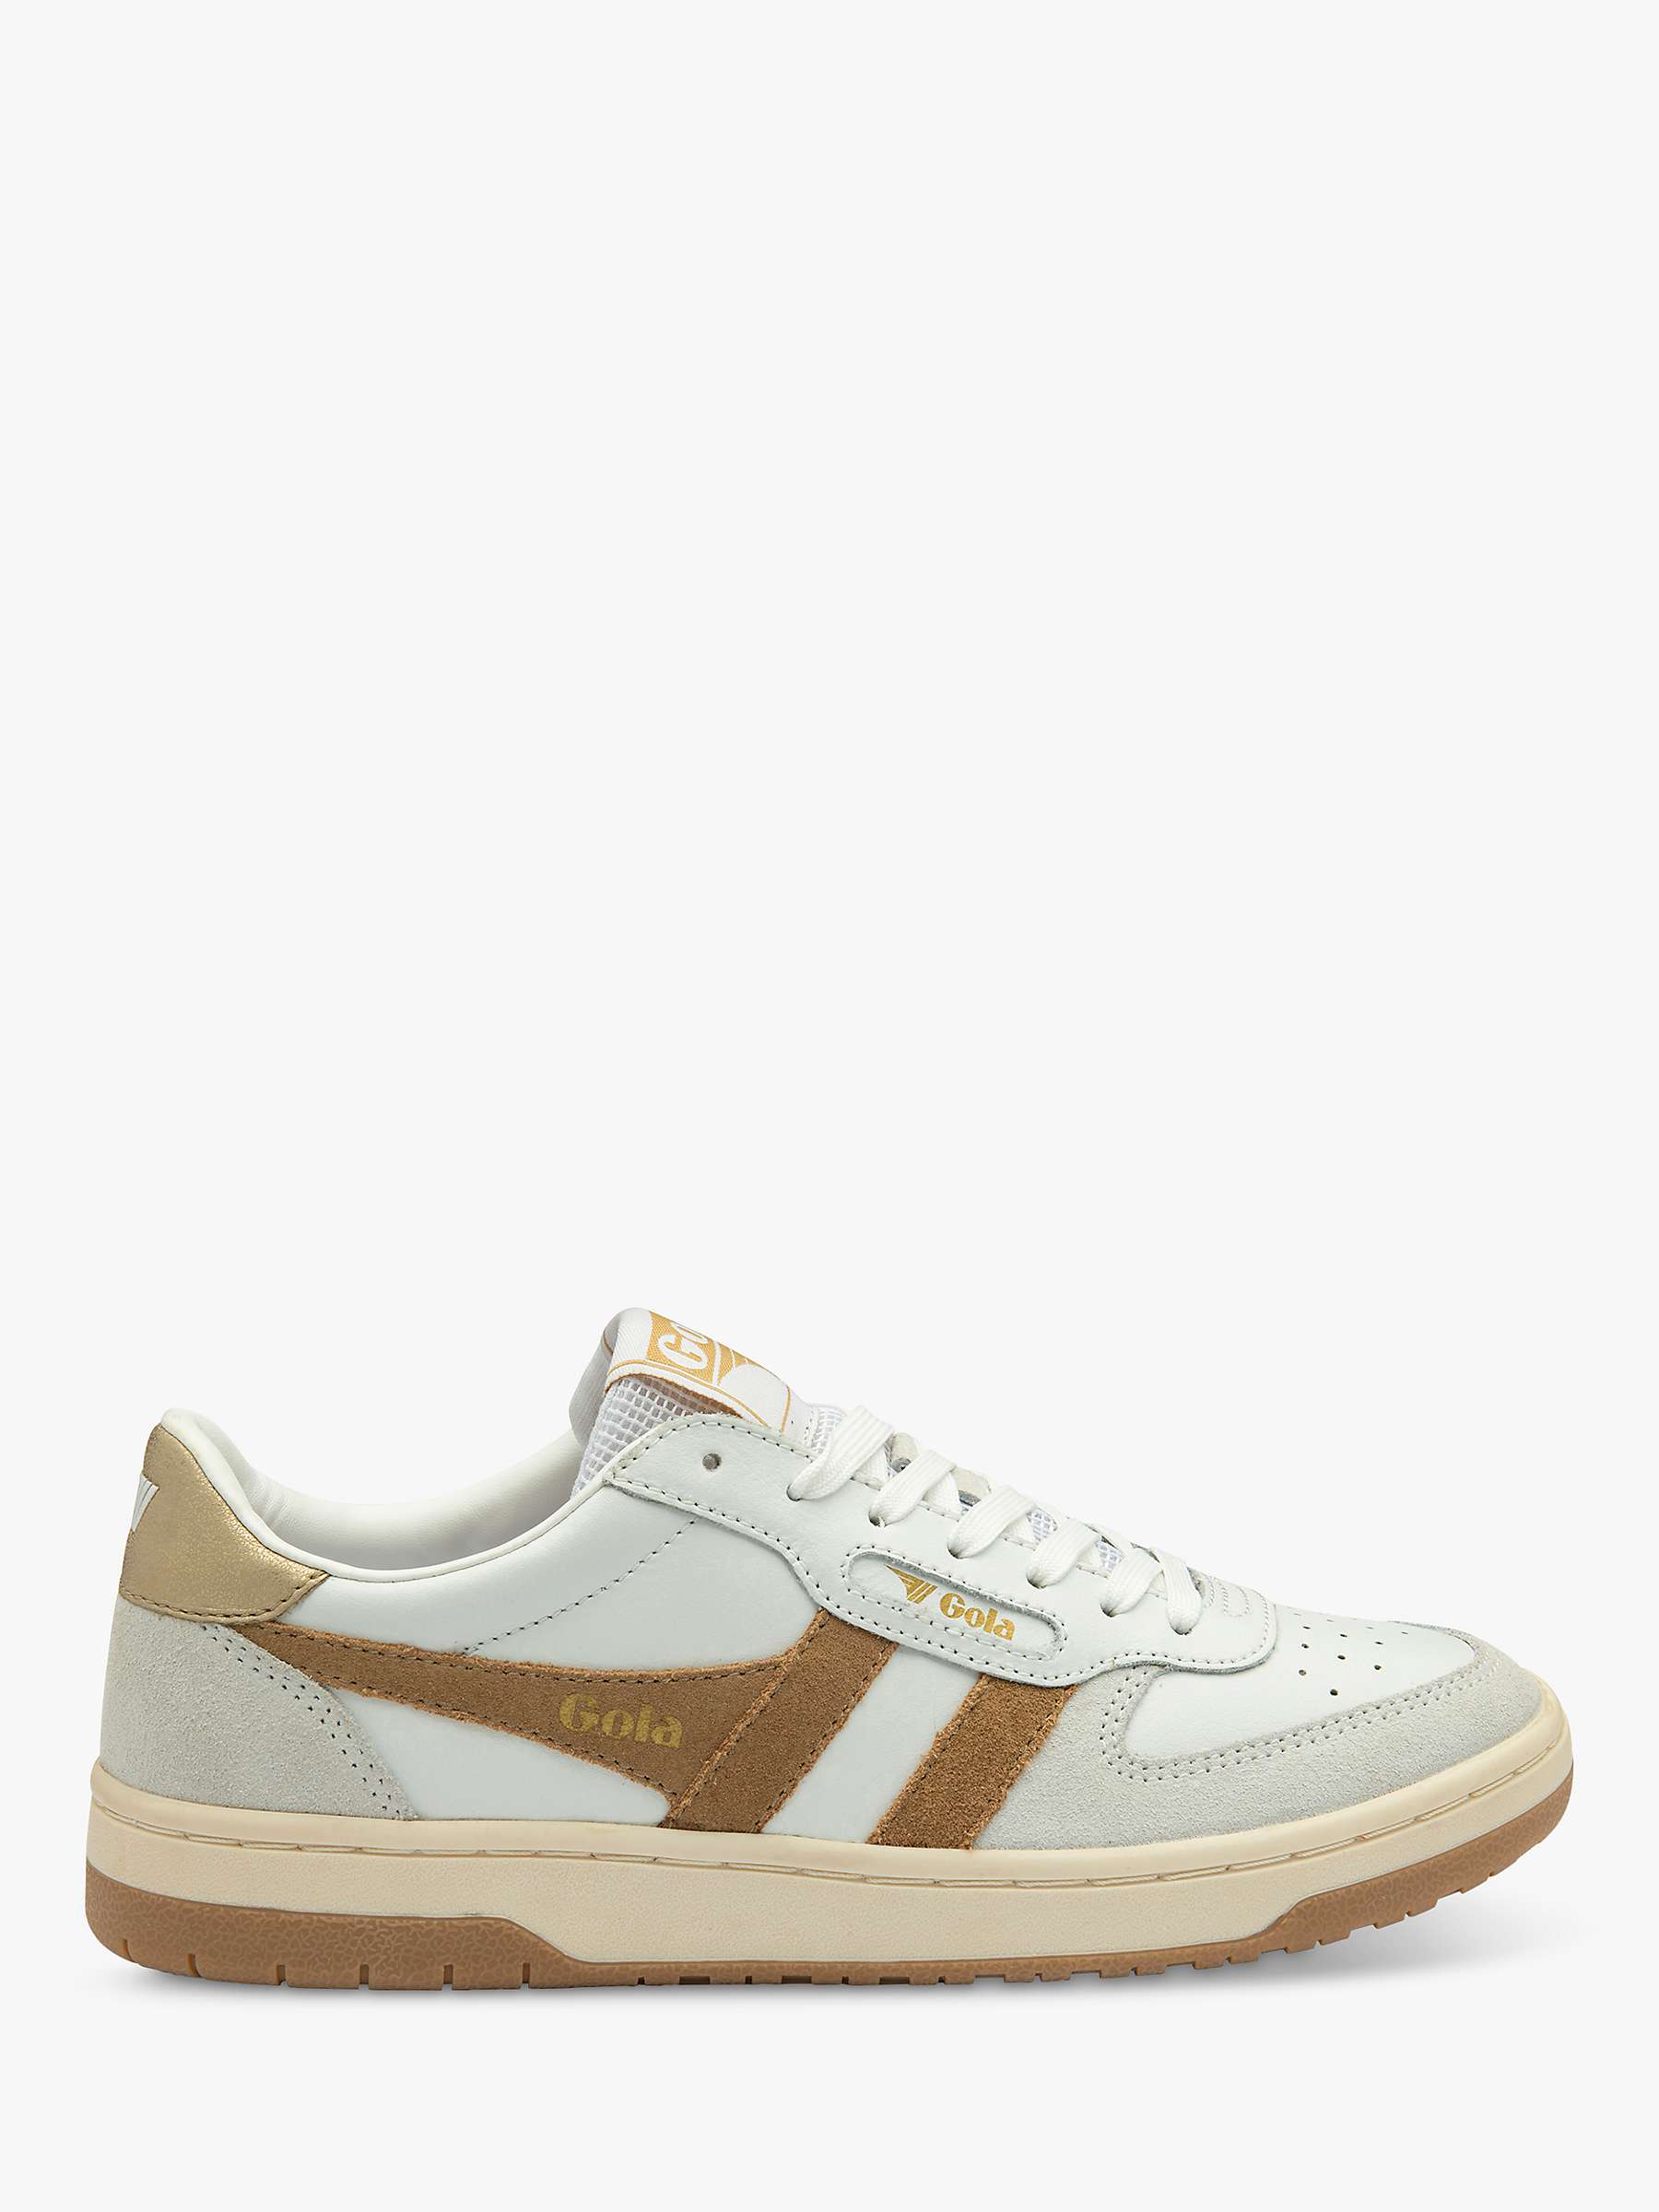 Buy Gola Classics Hawk Leather Lace Up Trainers, White/Caramel/Gold Online at johnlewis.com